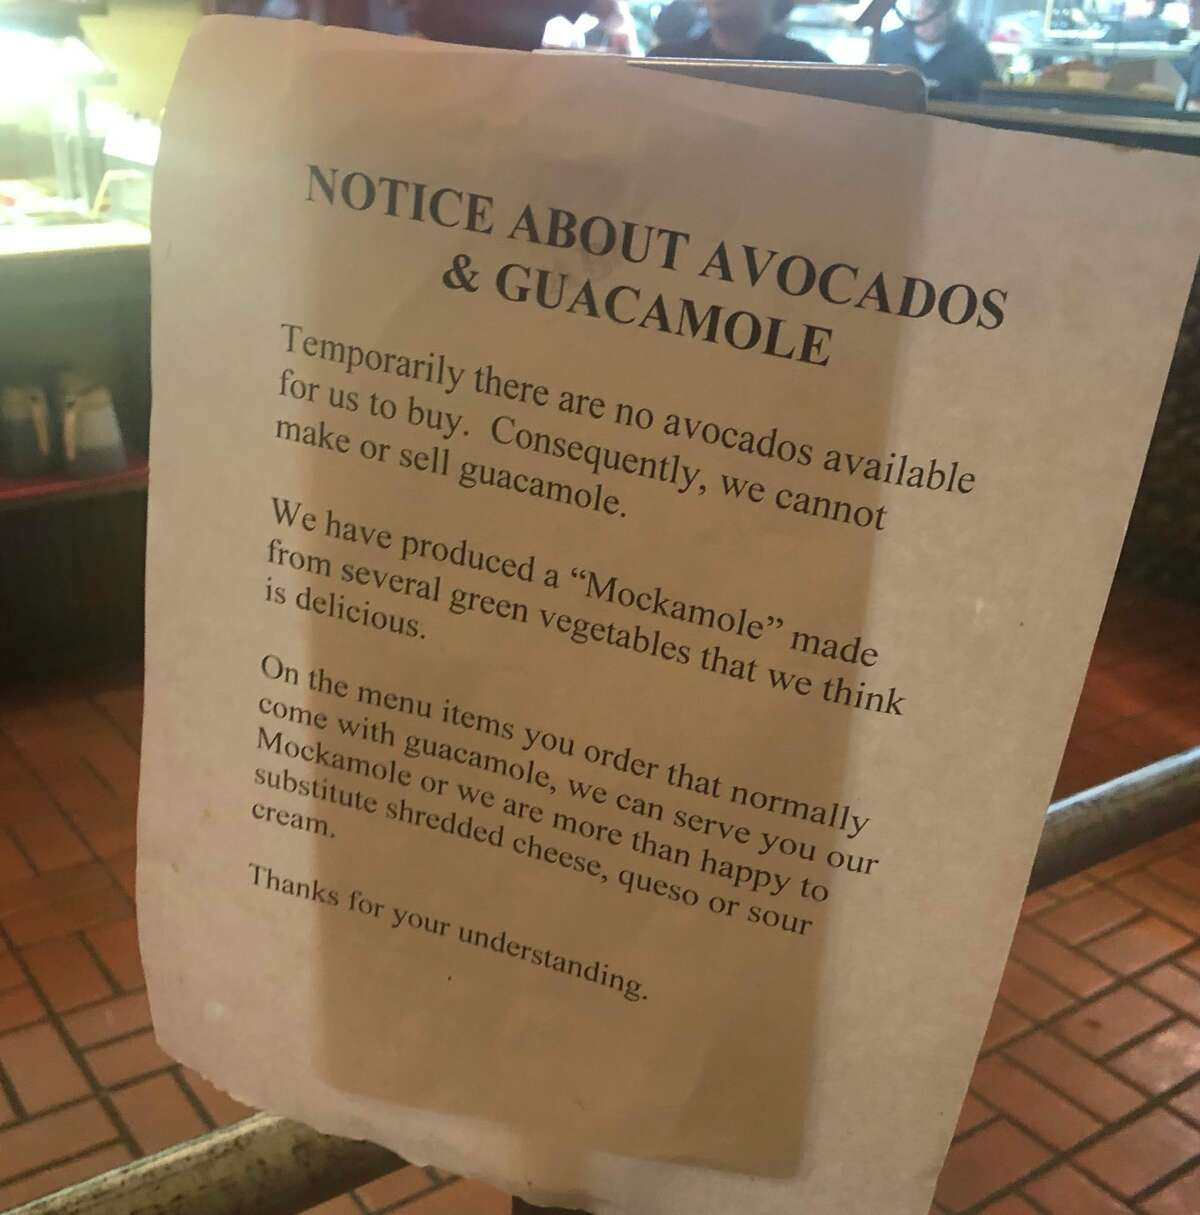 MySA.com readers asked about the situation after reading a notice about avocados and guacamole posted at one of the chain locations. The restaurant told customers that "there are no avocados to buy" and so mockamole, a blend of green vegetables, would be served or diners could choose to substitute with shredded cheese, queso or sour cream.